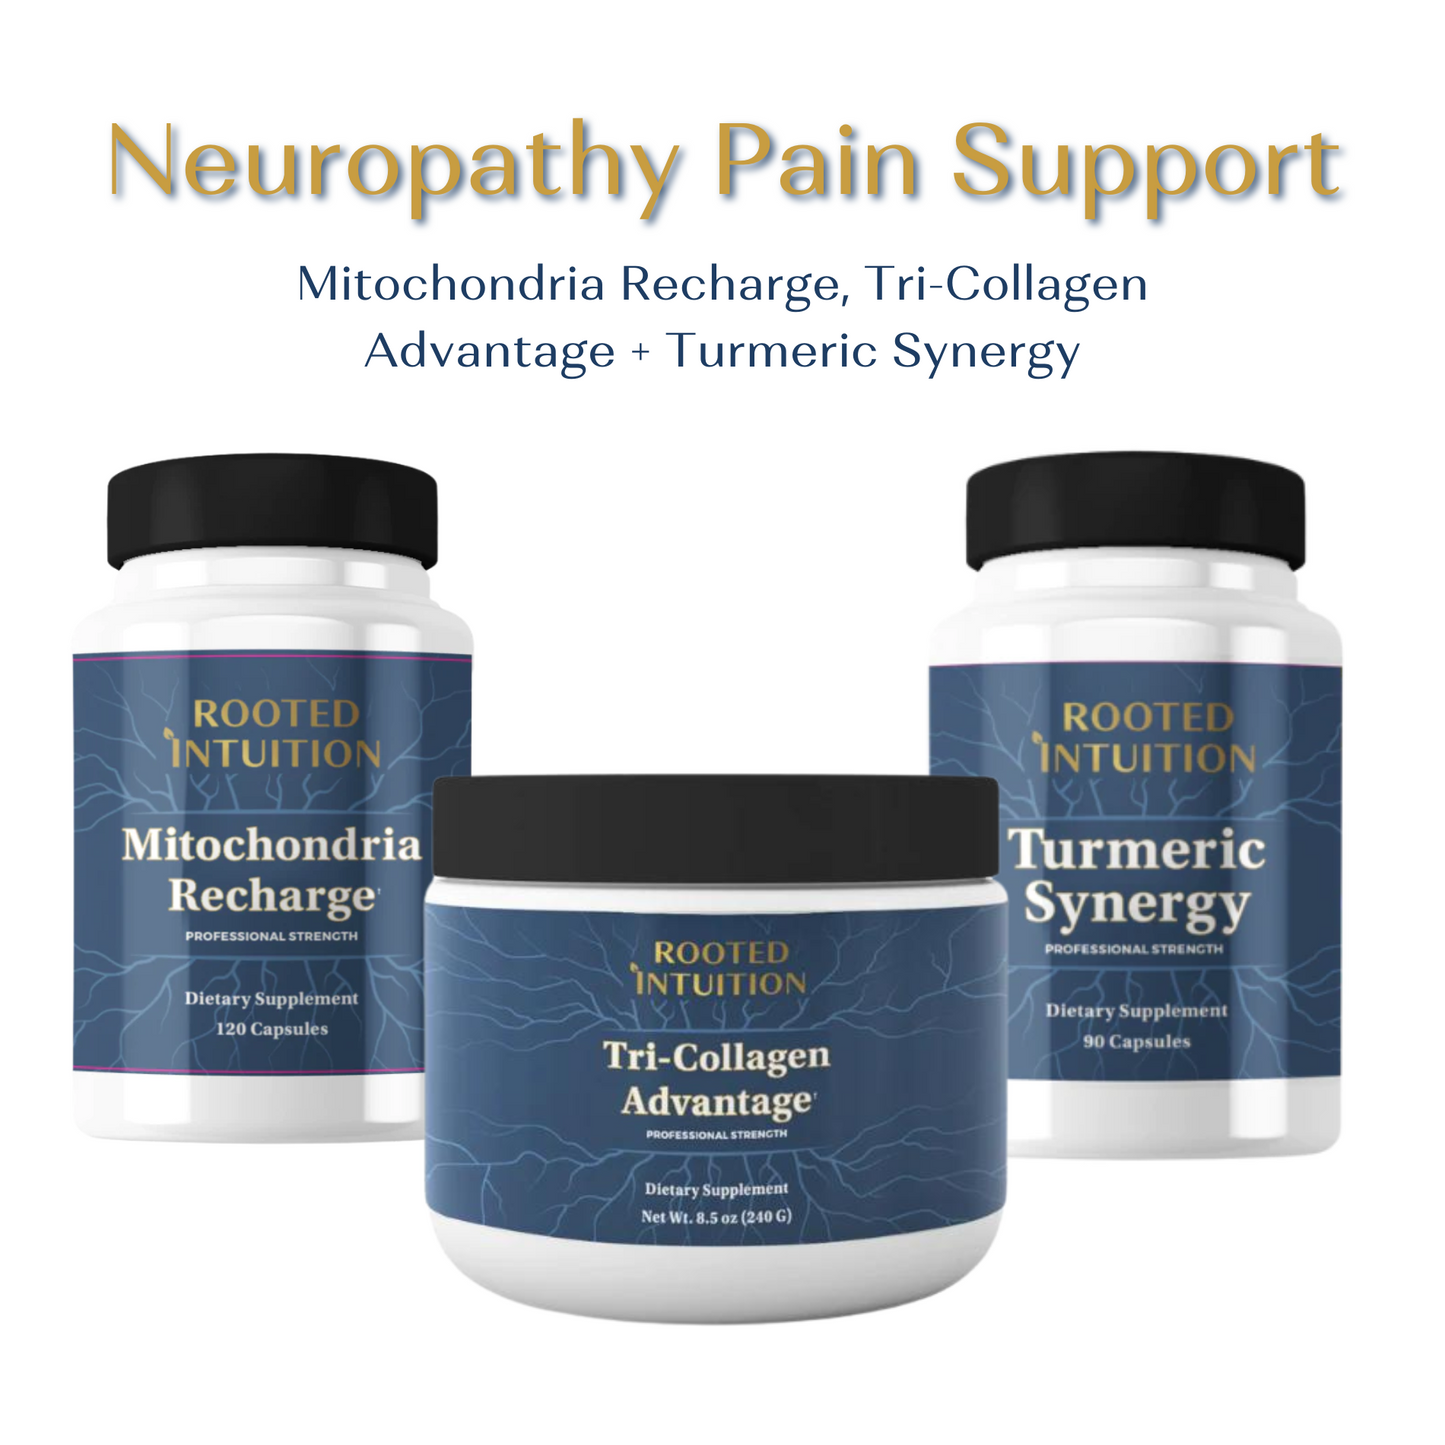 Neuropathy Pain Support